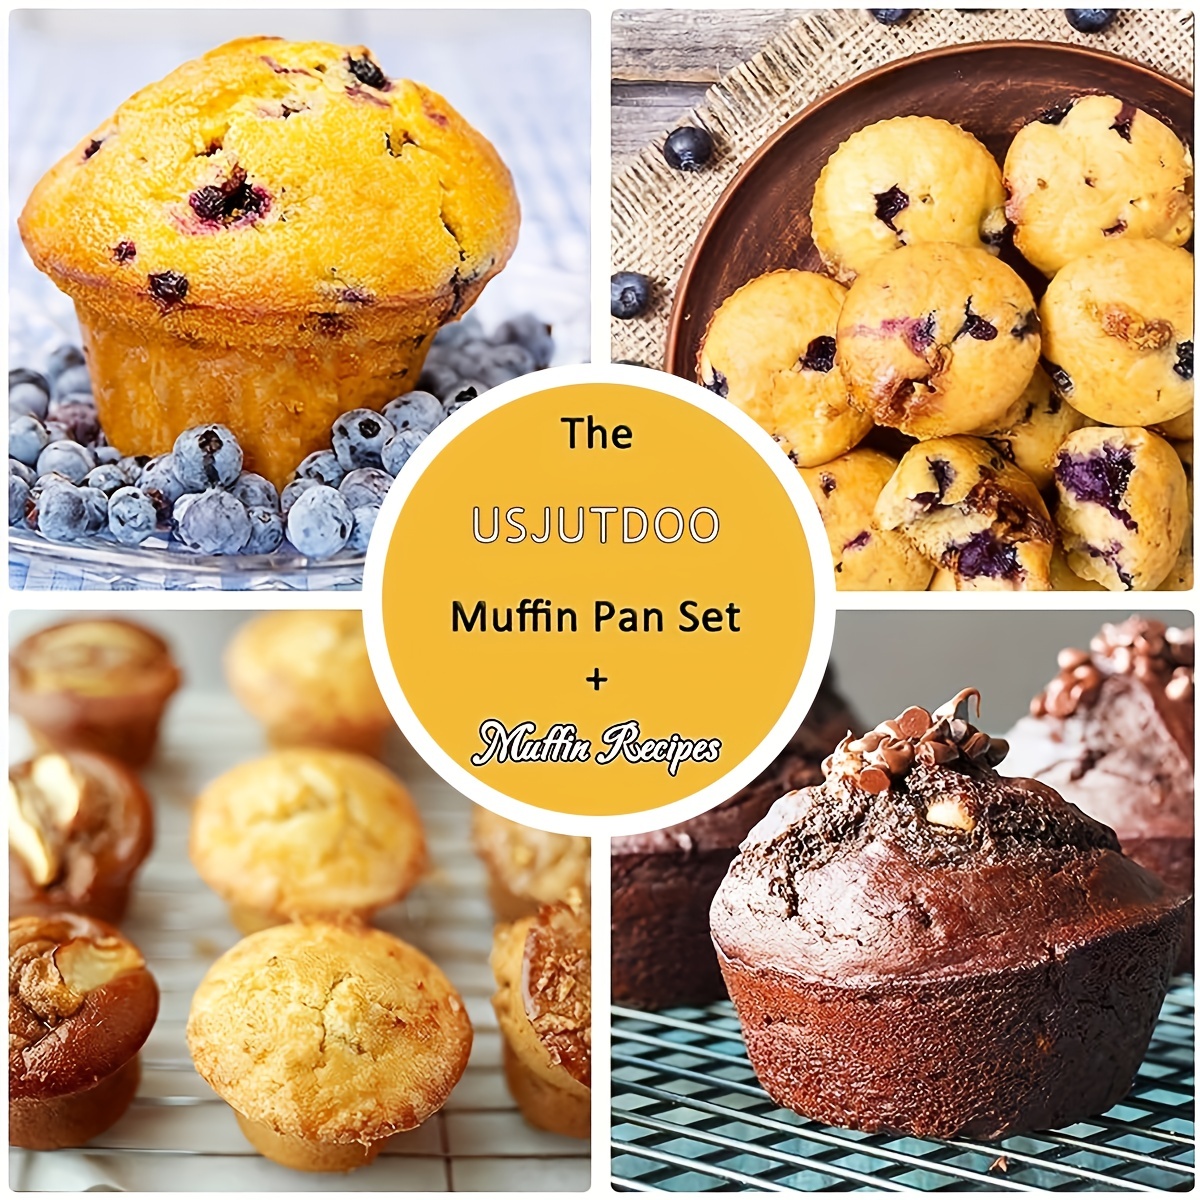 Silicone Muffin Pan, Bpa Free Cupcake Pans, Including Mini 24 Cups